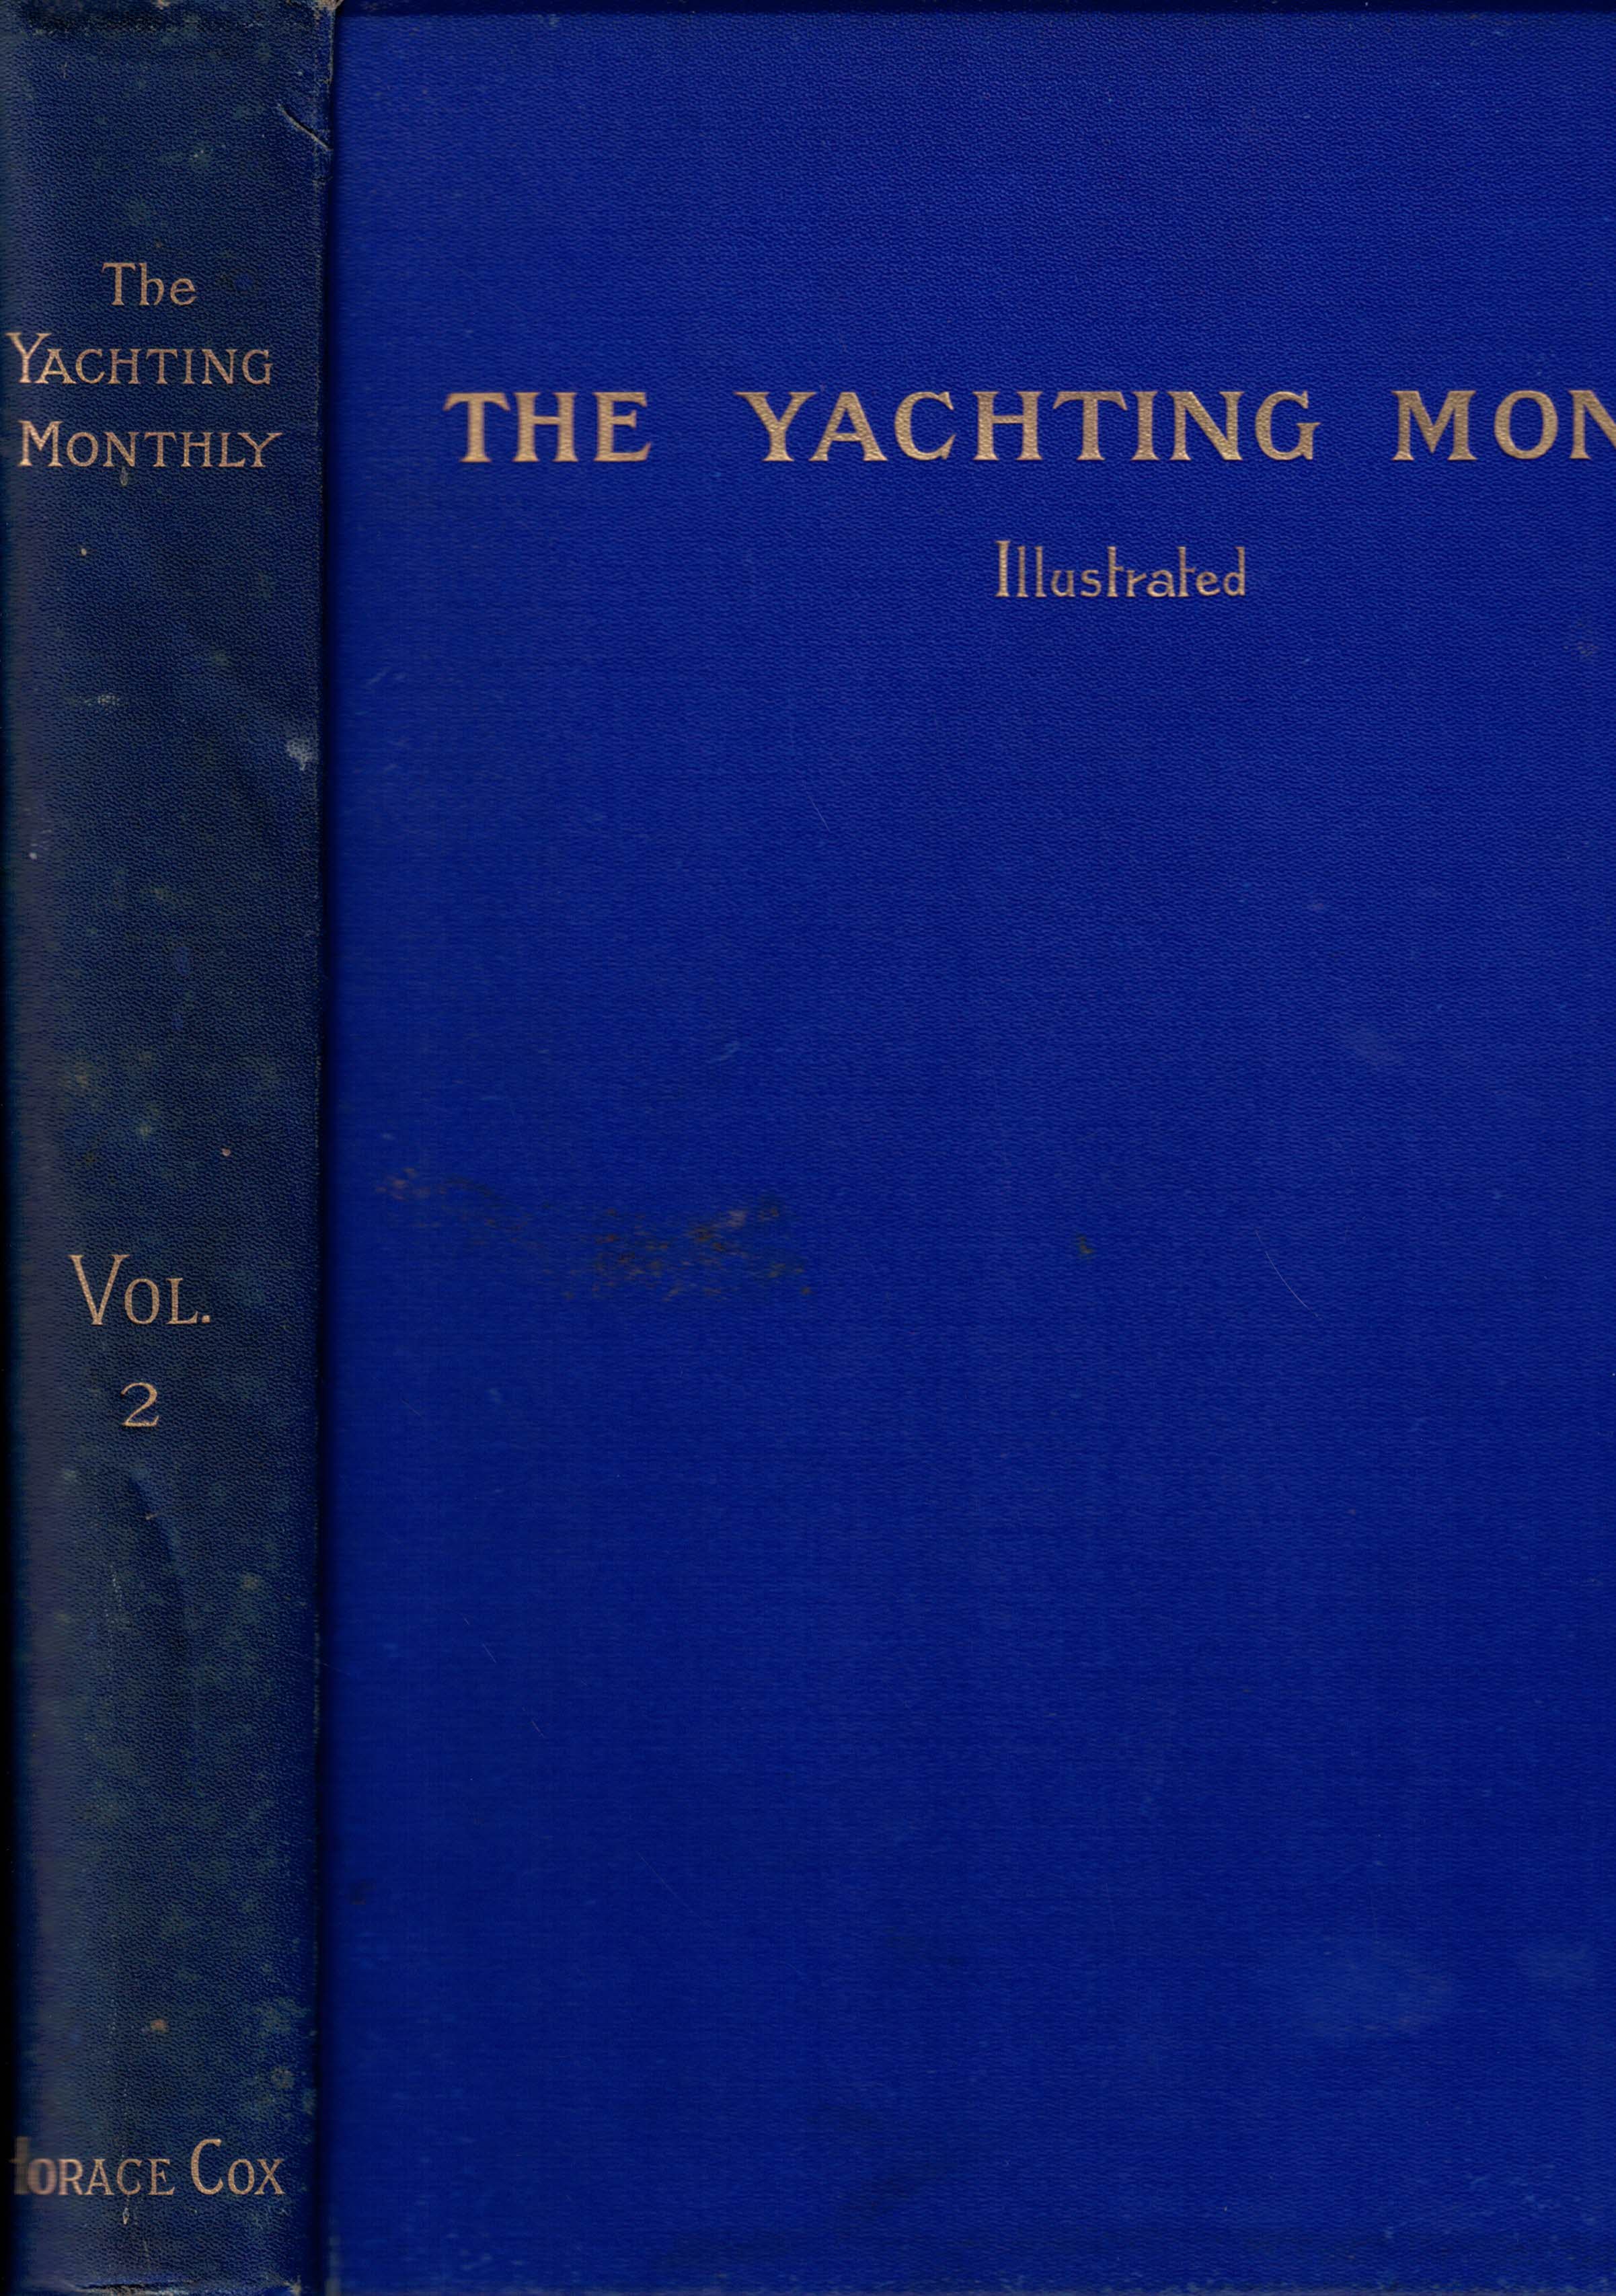 The Yachting  and Boating Monthly. [Illustrated].  Volume II.- Nos. VII to XII. November 1906 - April 1907.